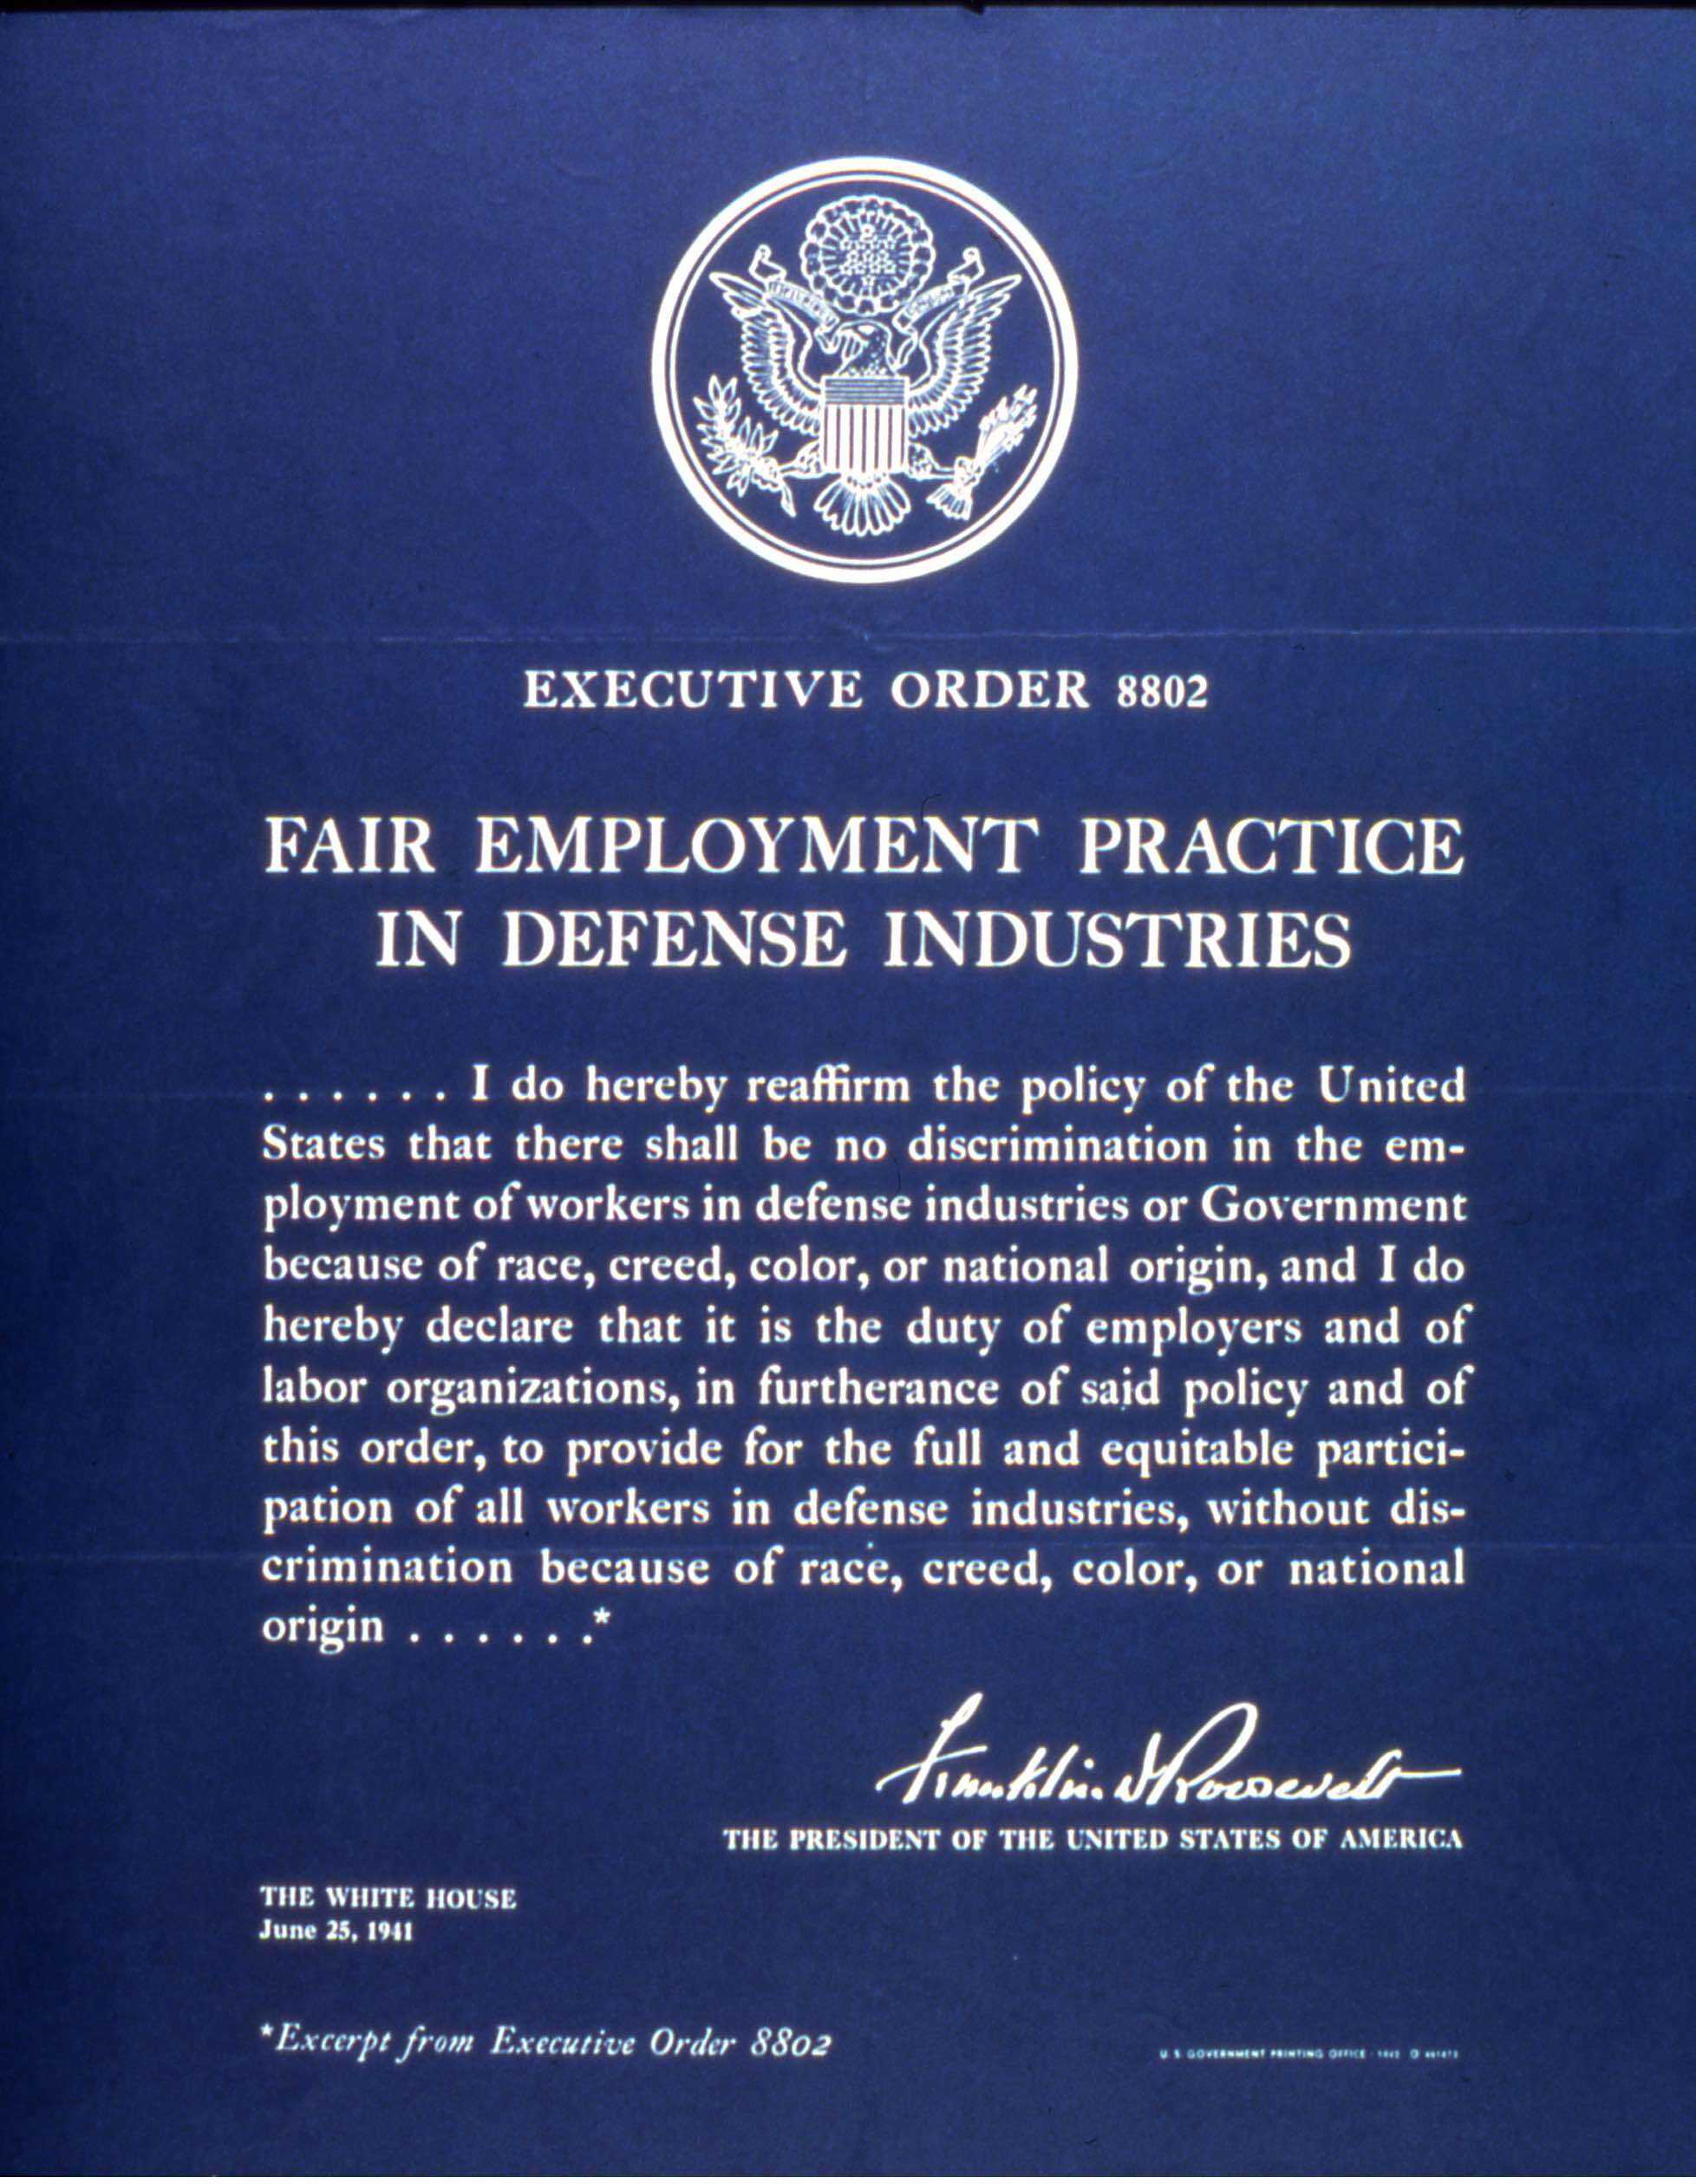 Image of Executive Order 8802, “Fair Employment Practice in Defense Industries”